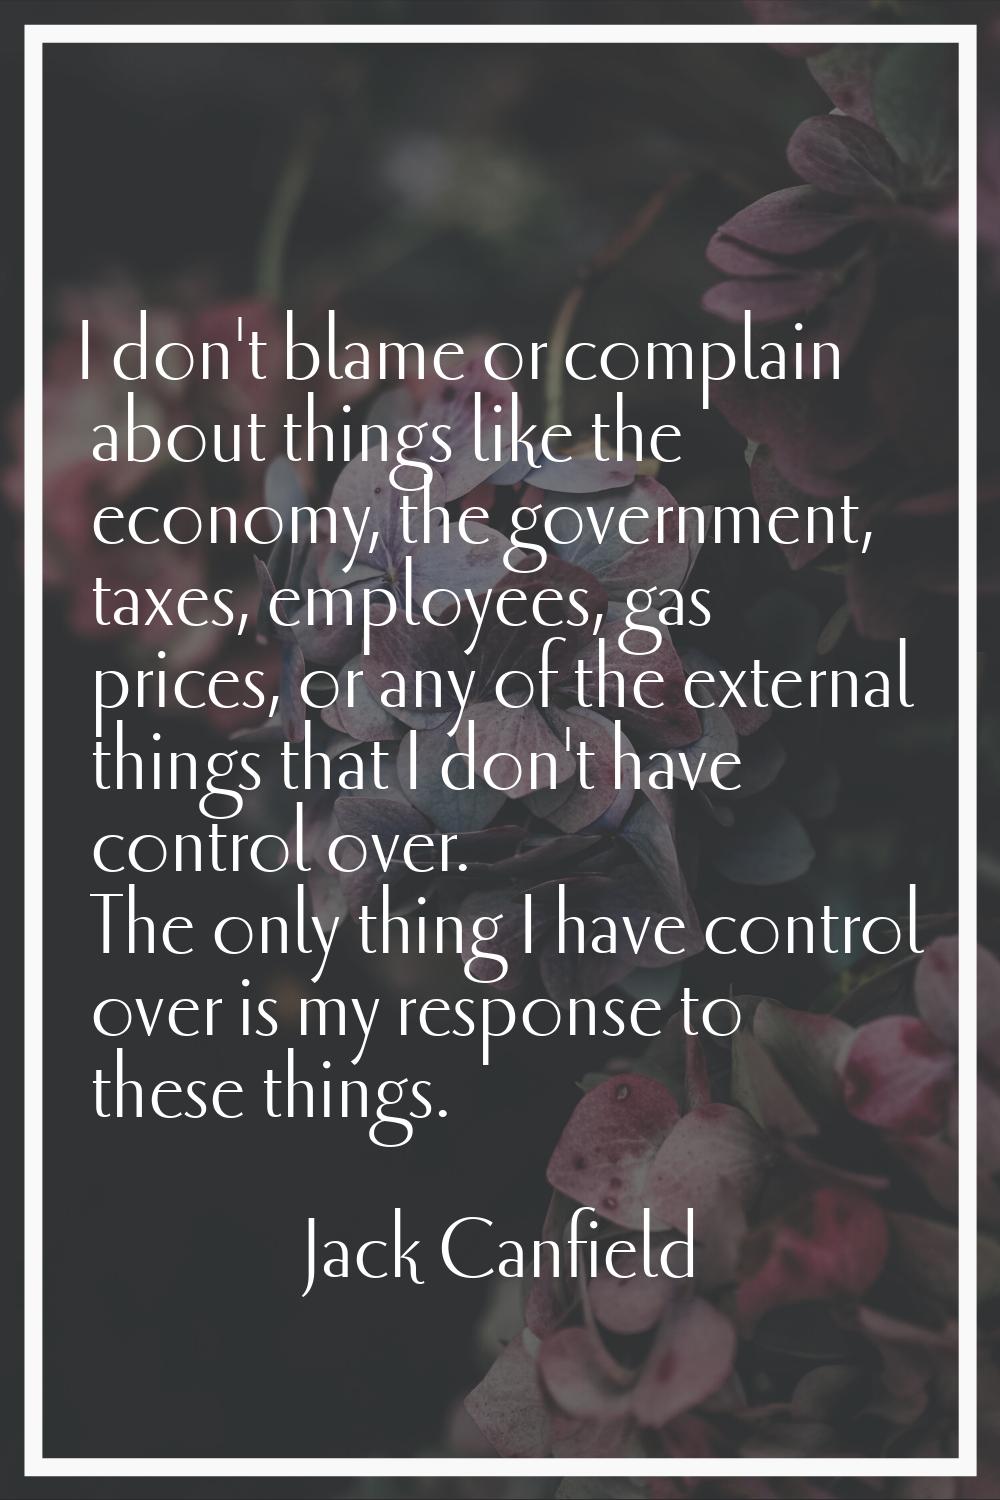 I don't blame or complain about things like the economy, the government, taxes, employees, gas pric